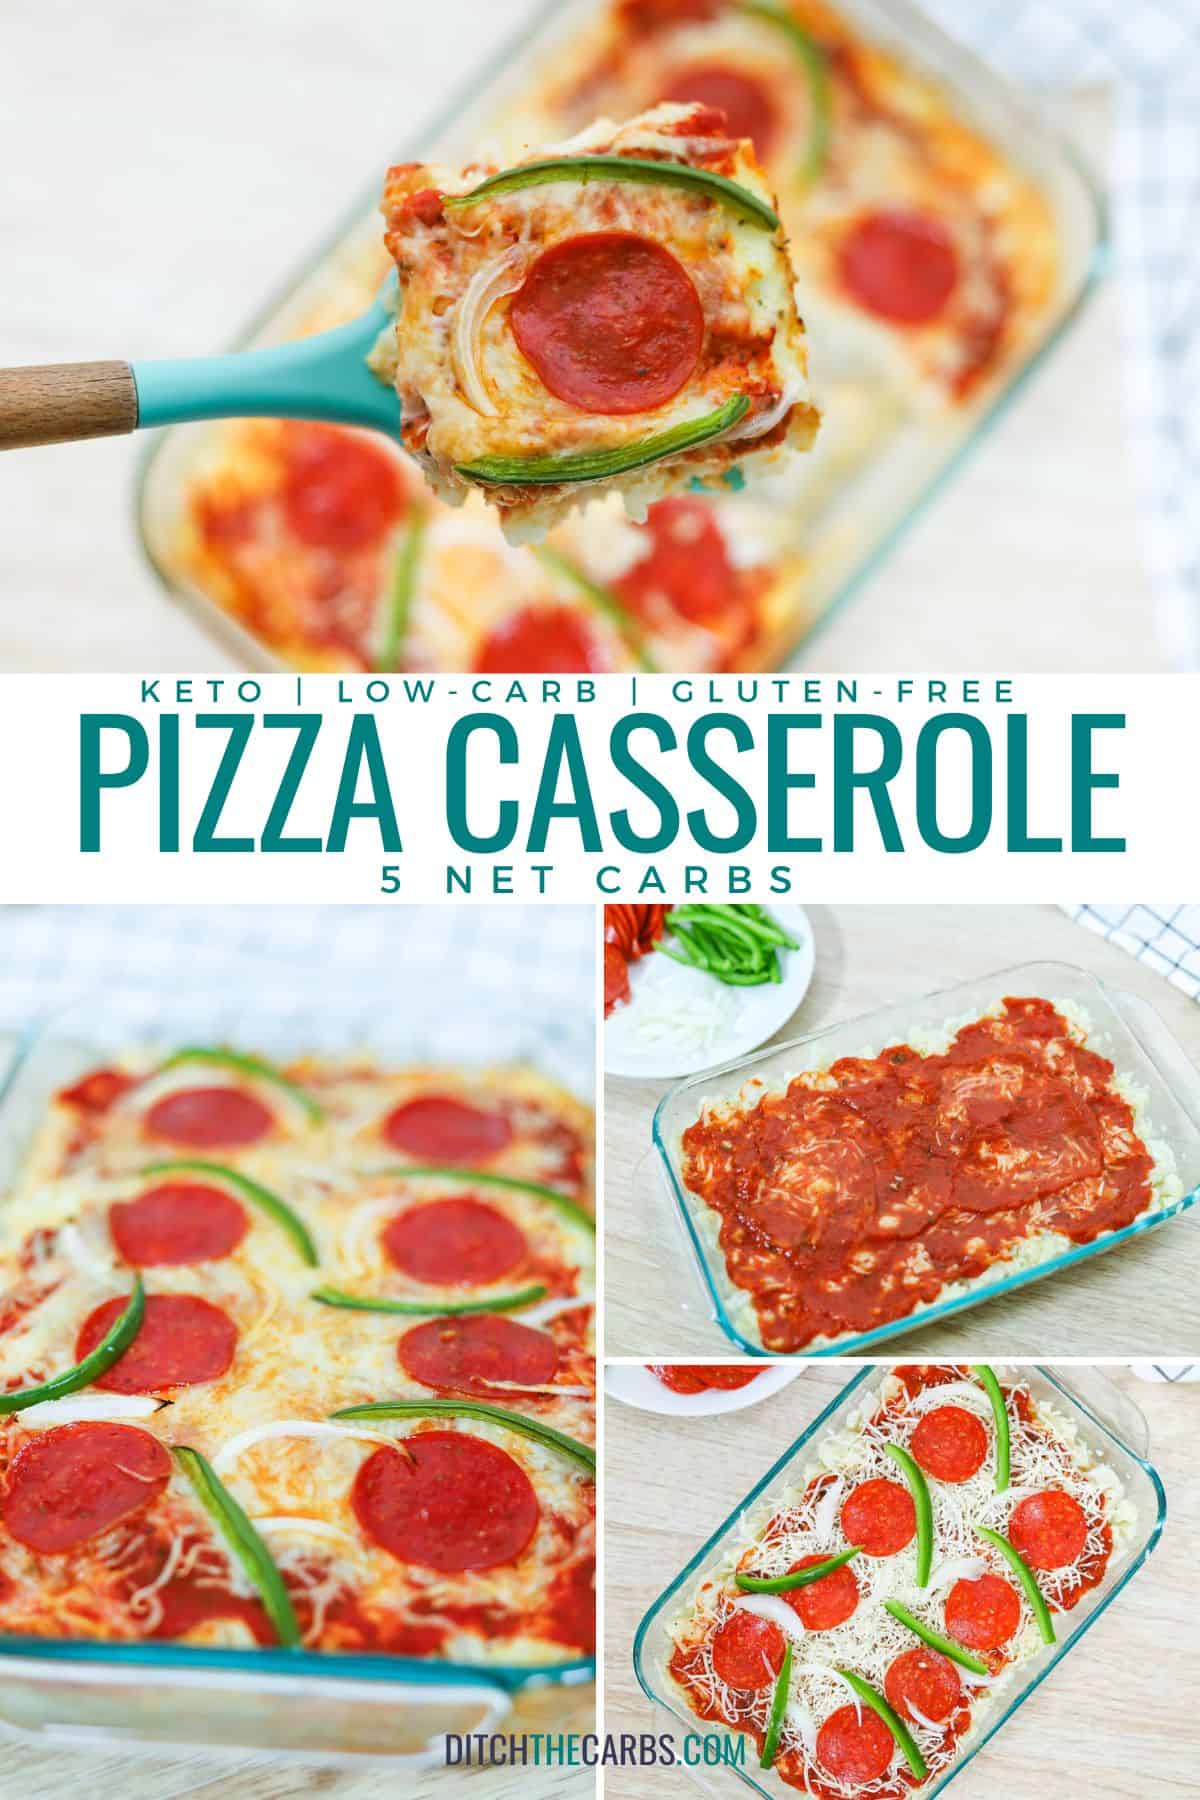 A collage showing keto pizza casserole being made at various stages.